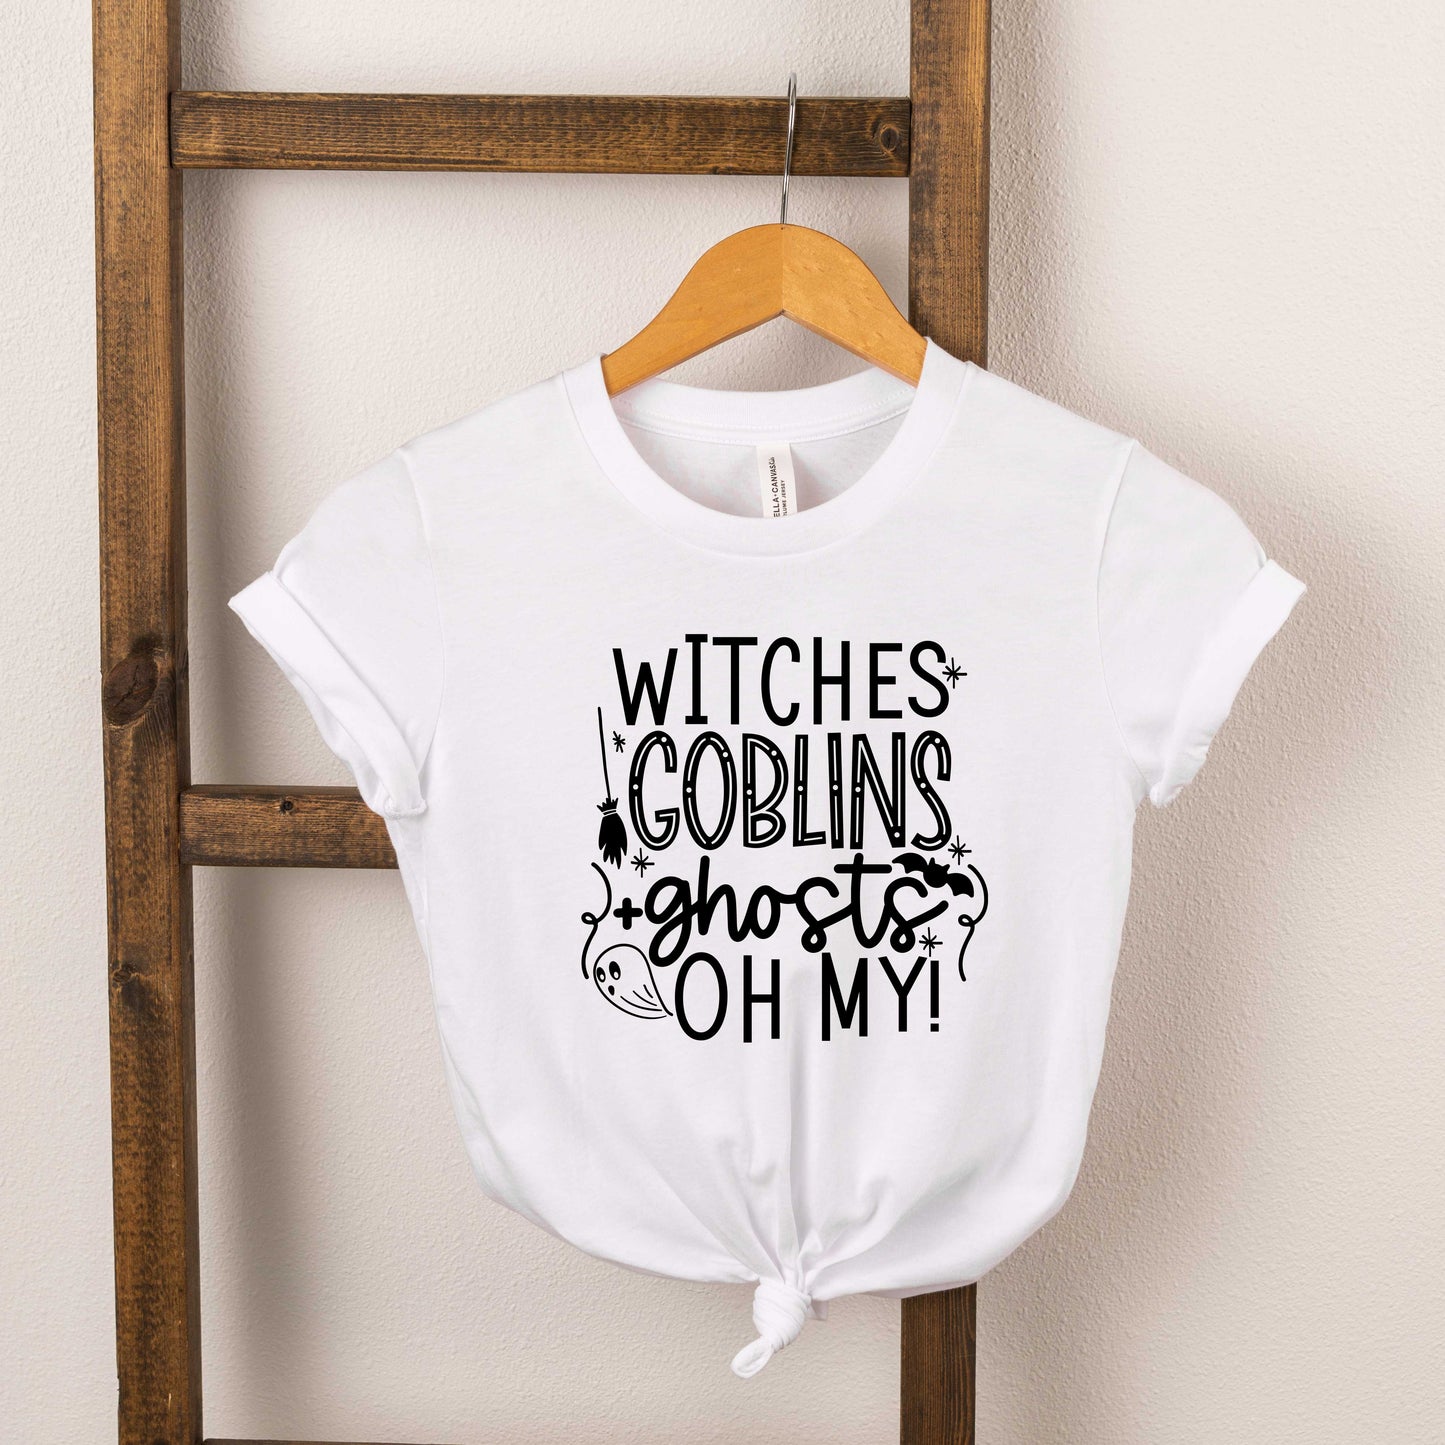 Witches Goblins Ghosts | Toddler Short Sleeve Crew Neck